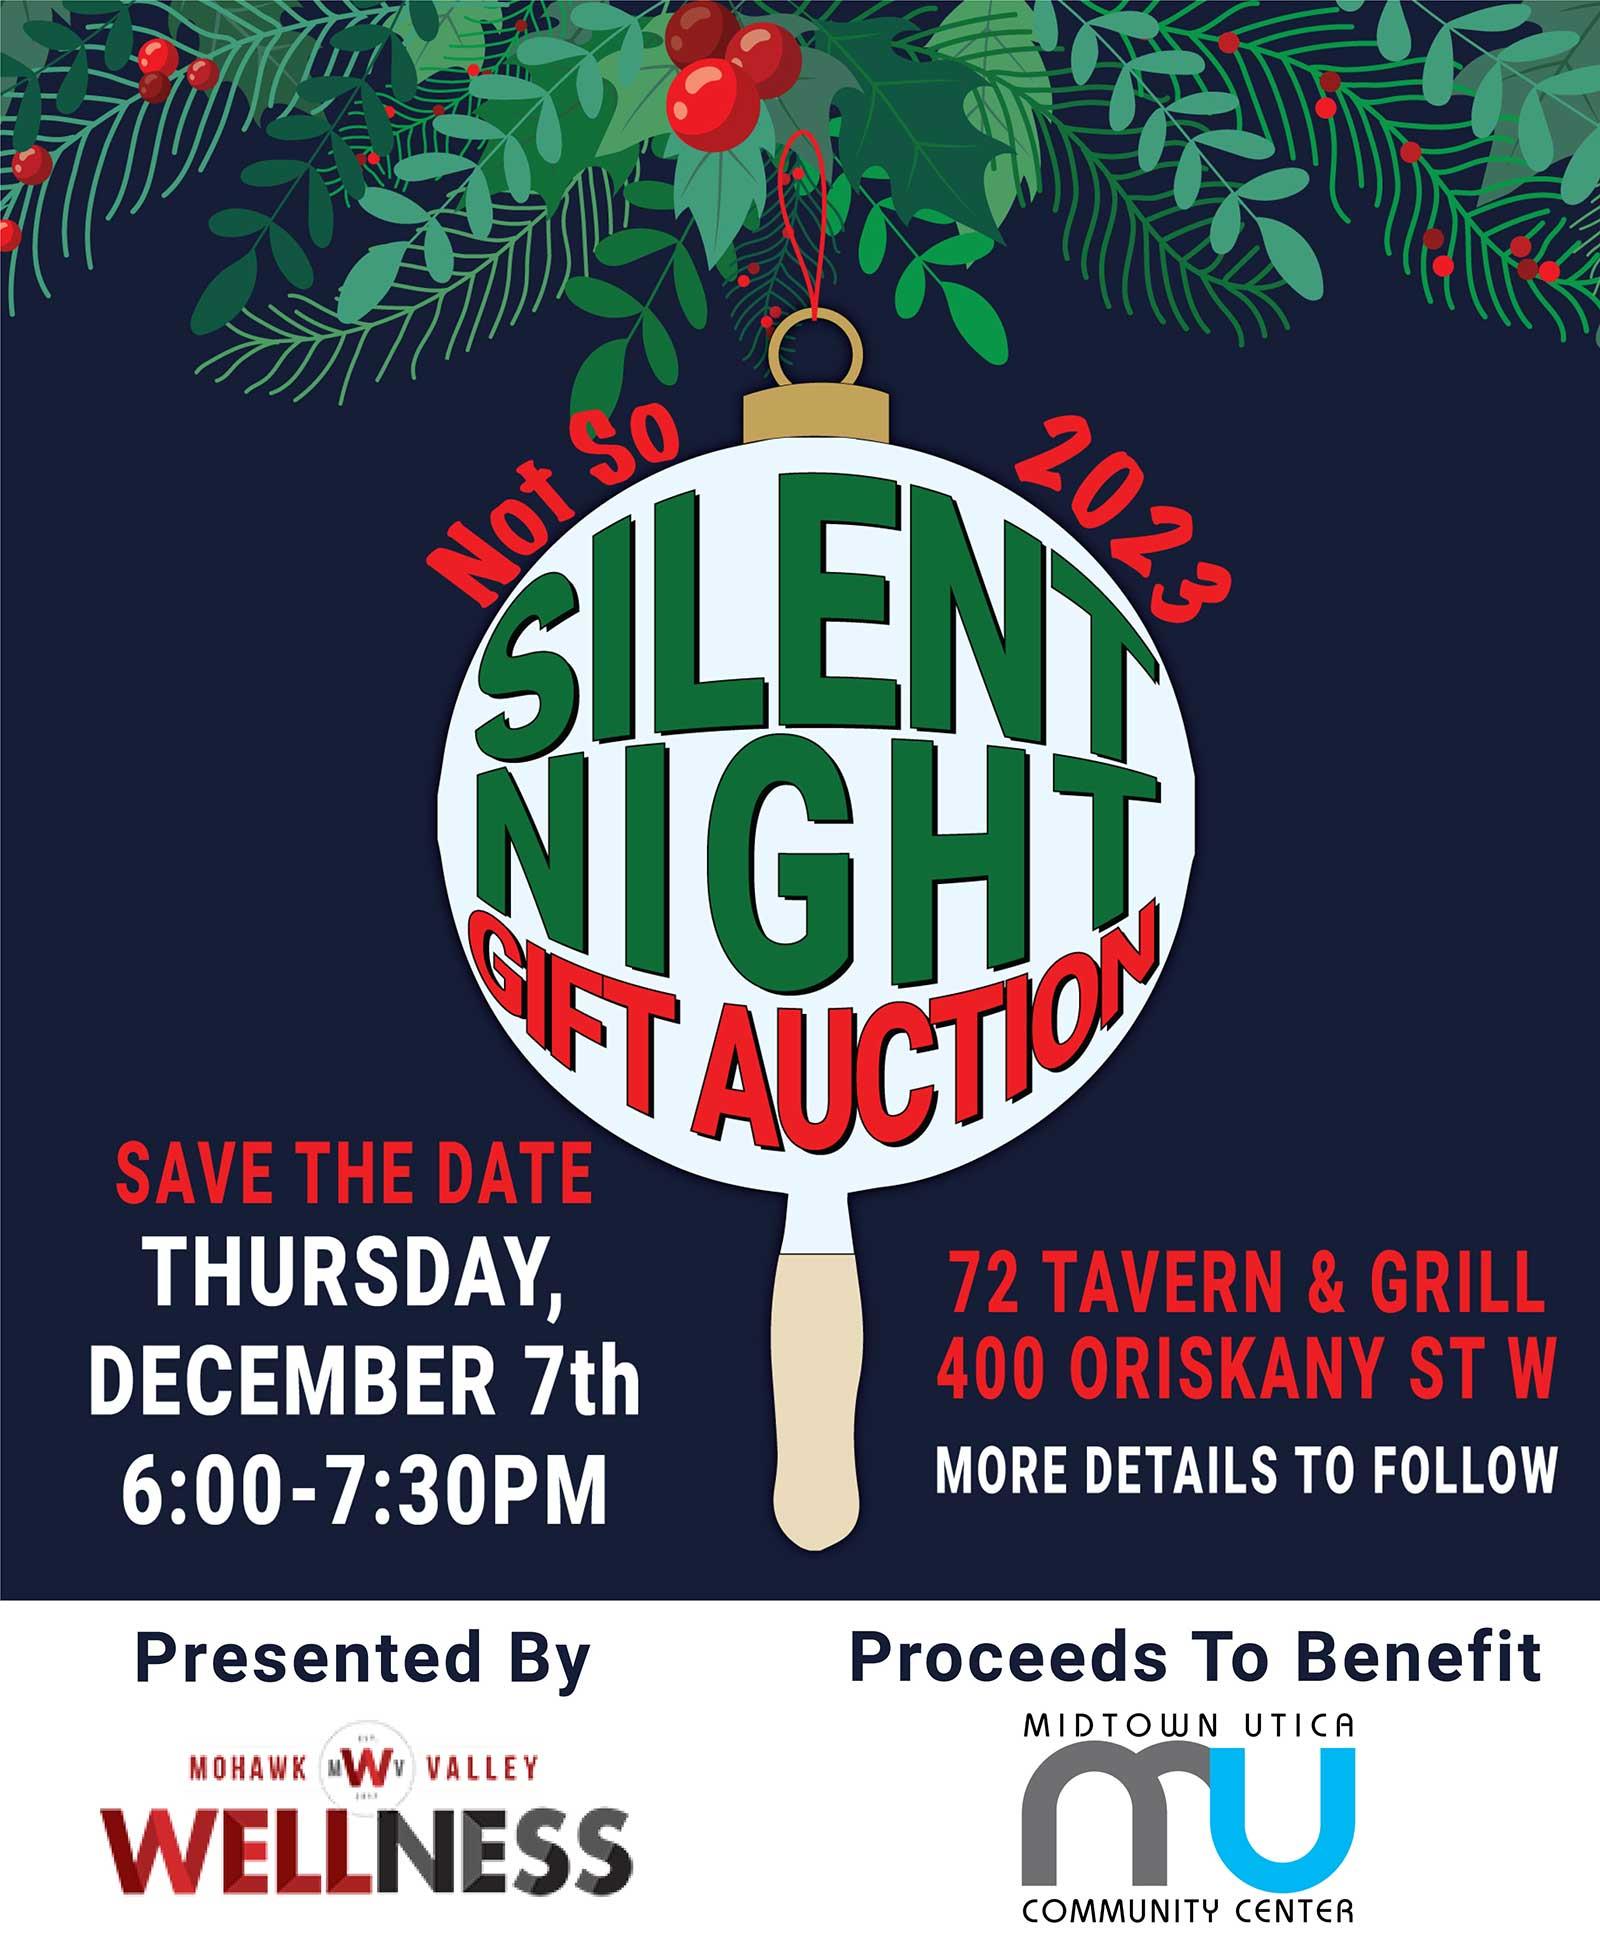 Not So Silent Night Auction